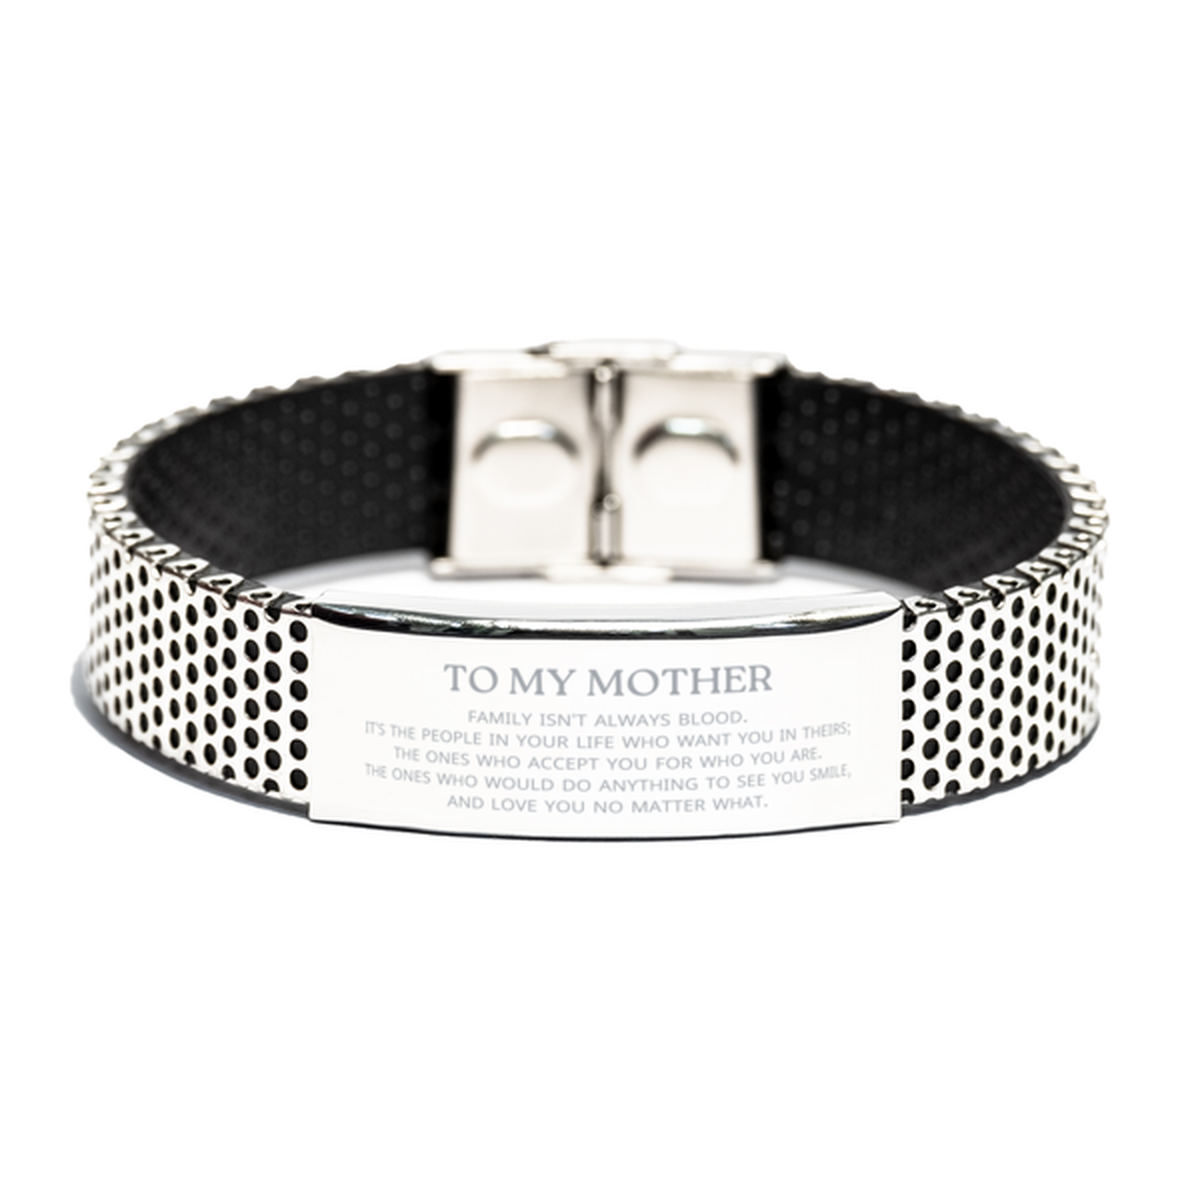 To My Mother Gifts, Family isn't always blood, Mother Stainless Steel Bracelet, Birthday Christmas Unique Present For Mother